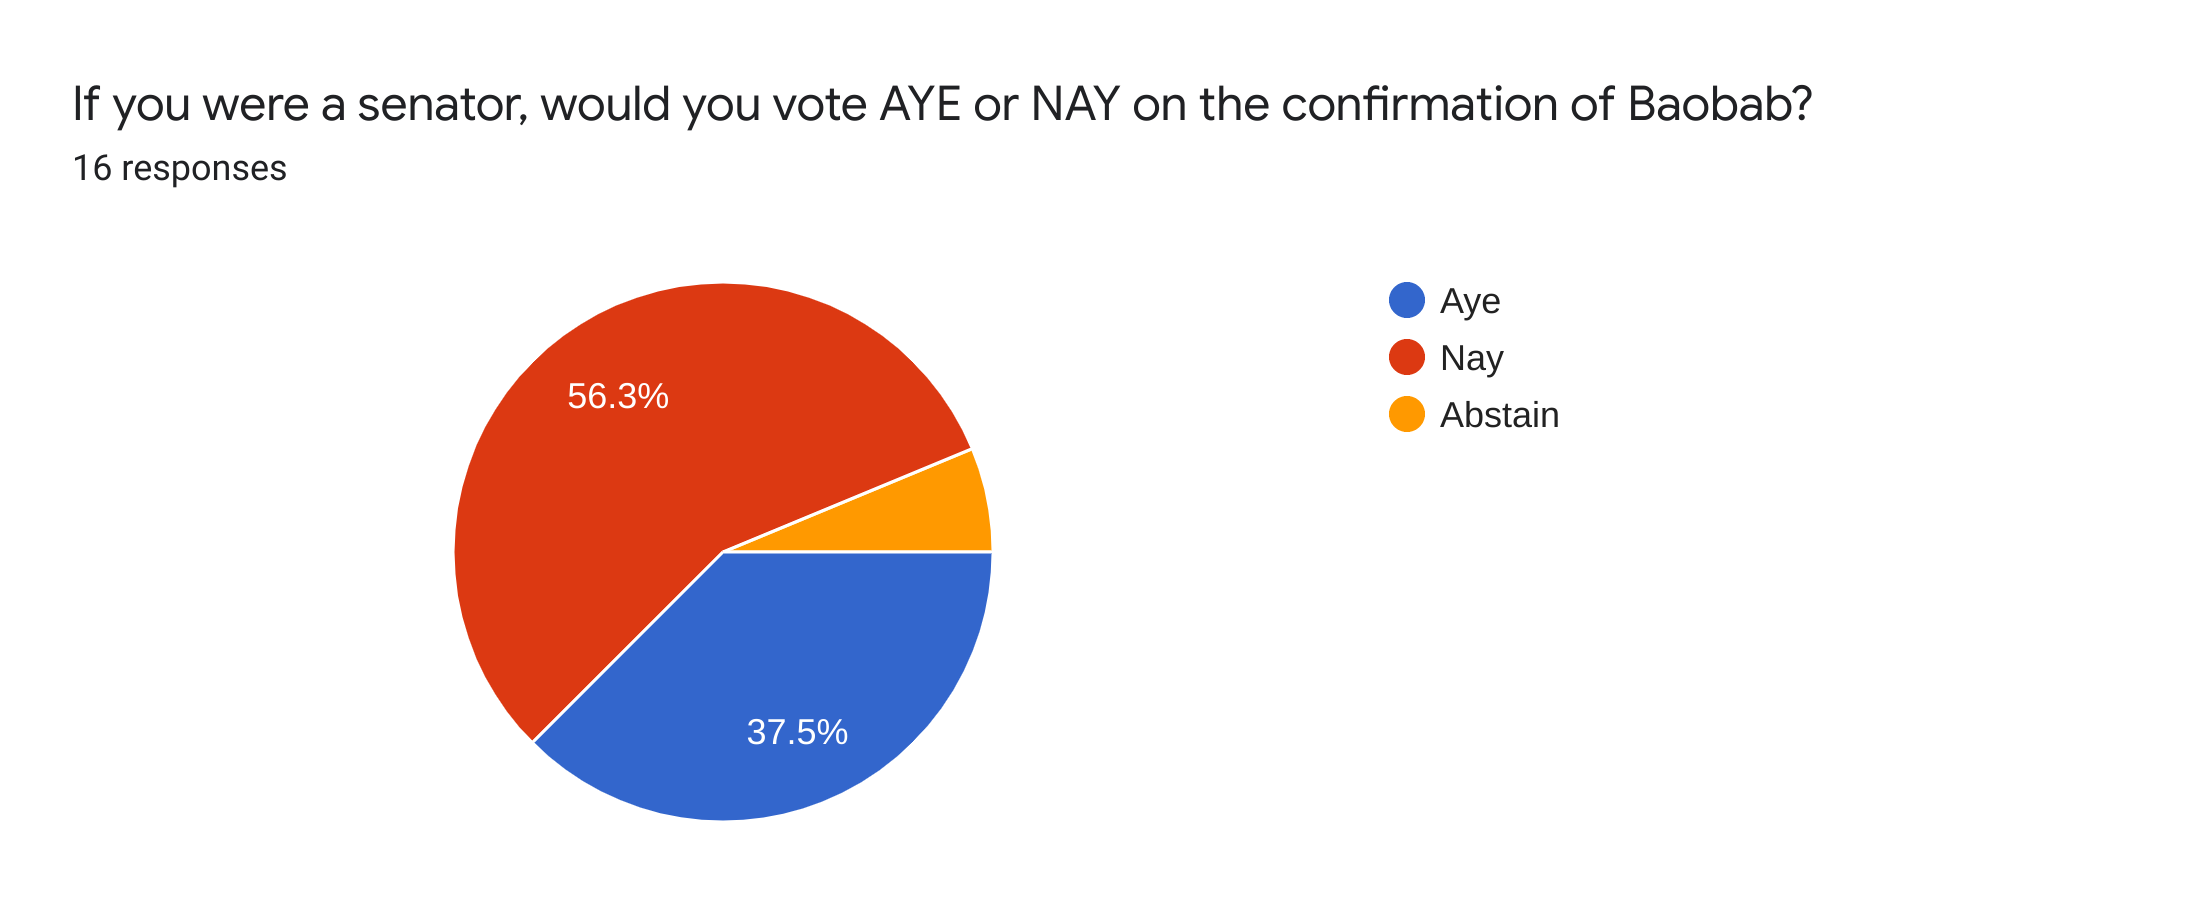 Forms response chart. Question title: If you were a senator, would you vote AYE or NAY on the confirmation of Baobab?. Number of responses: 16 responses.